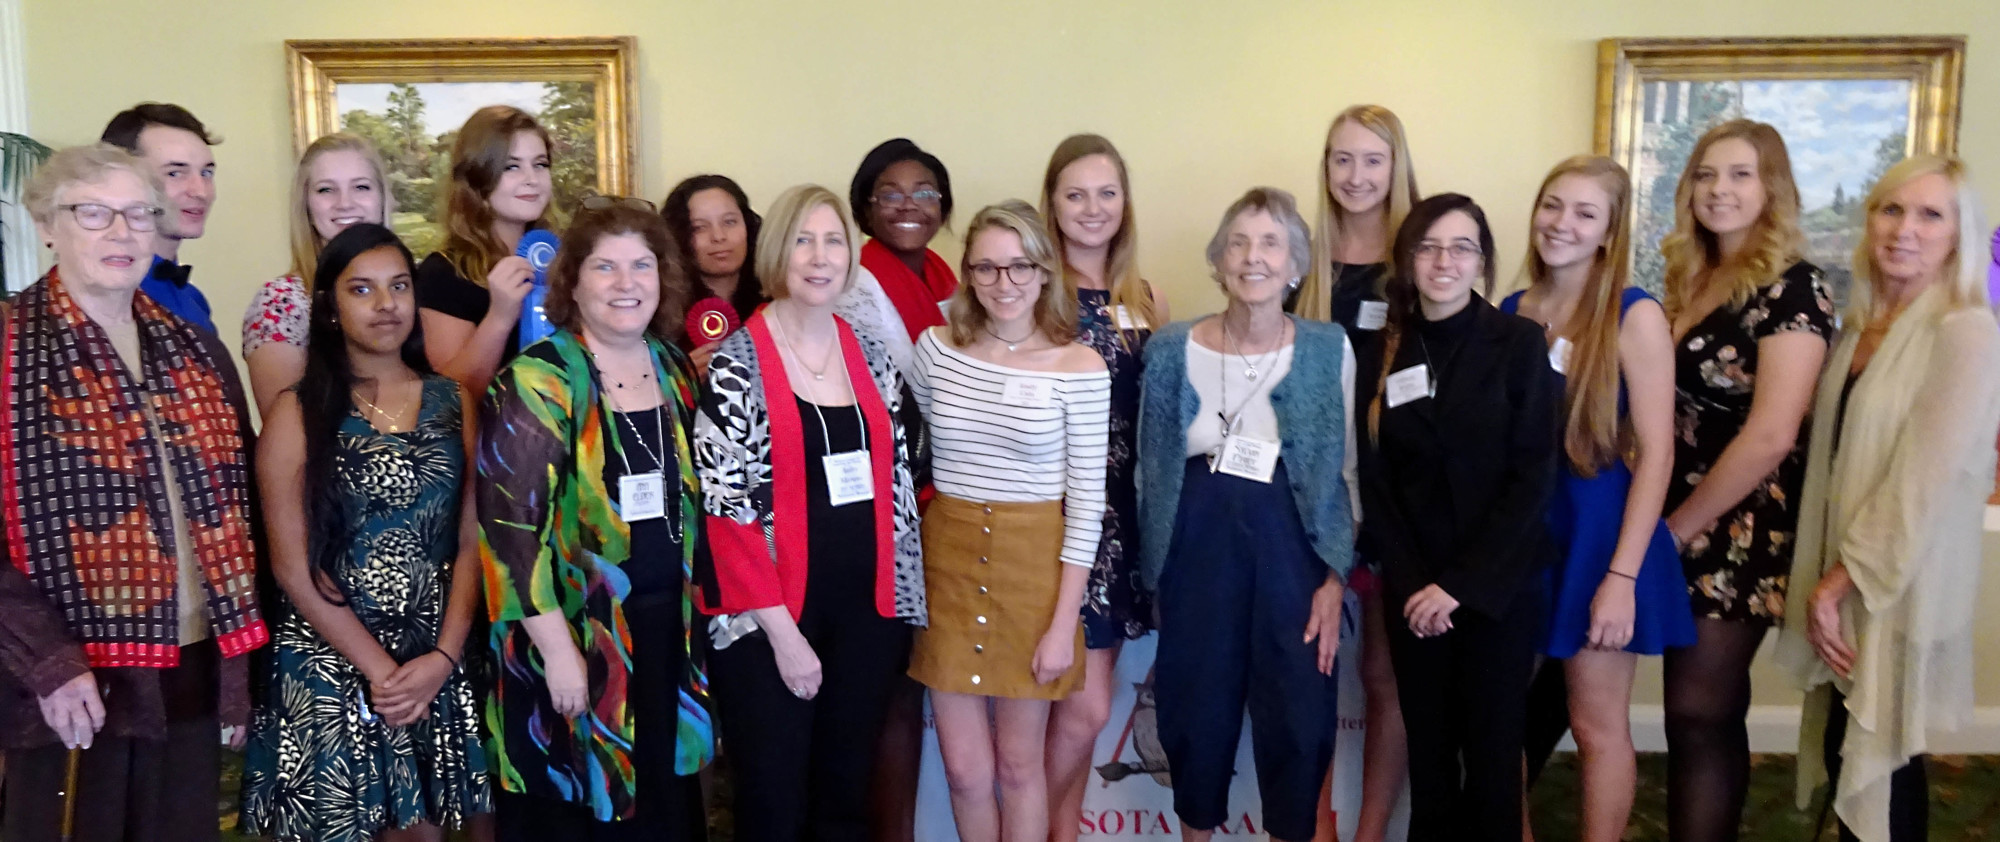 Every year the Sarasota Pen Women give out several scholarships to graduating high school seniors in Sarasota and Manatee counties. Photo by Polly Curran